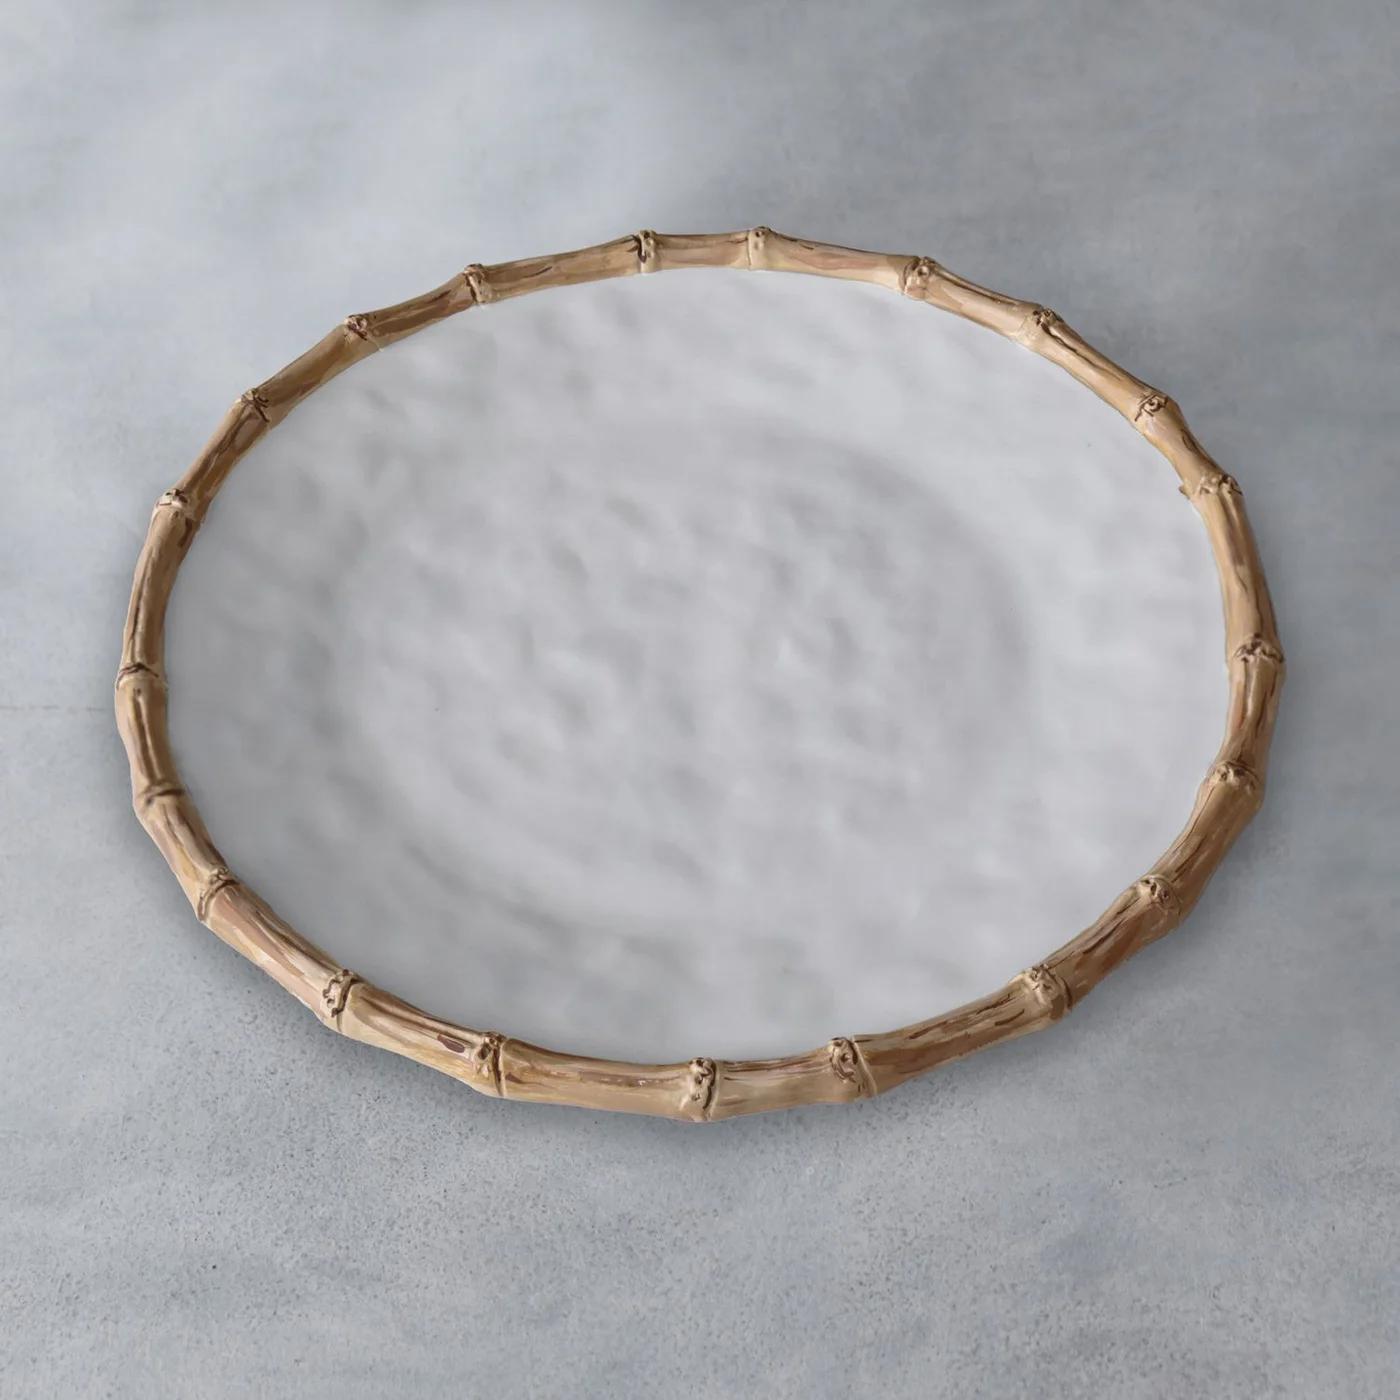 Beatriz Ball Vida Bamboo Round Platter-Home/Giftware-WHITE AND NATURAL-Kevin's Fine Outdoor Gear & Apparel